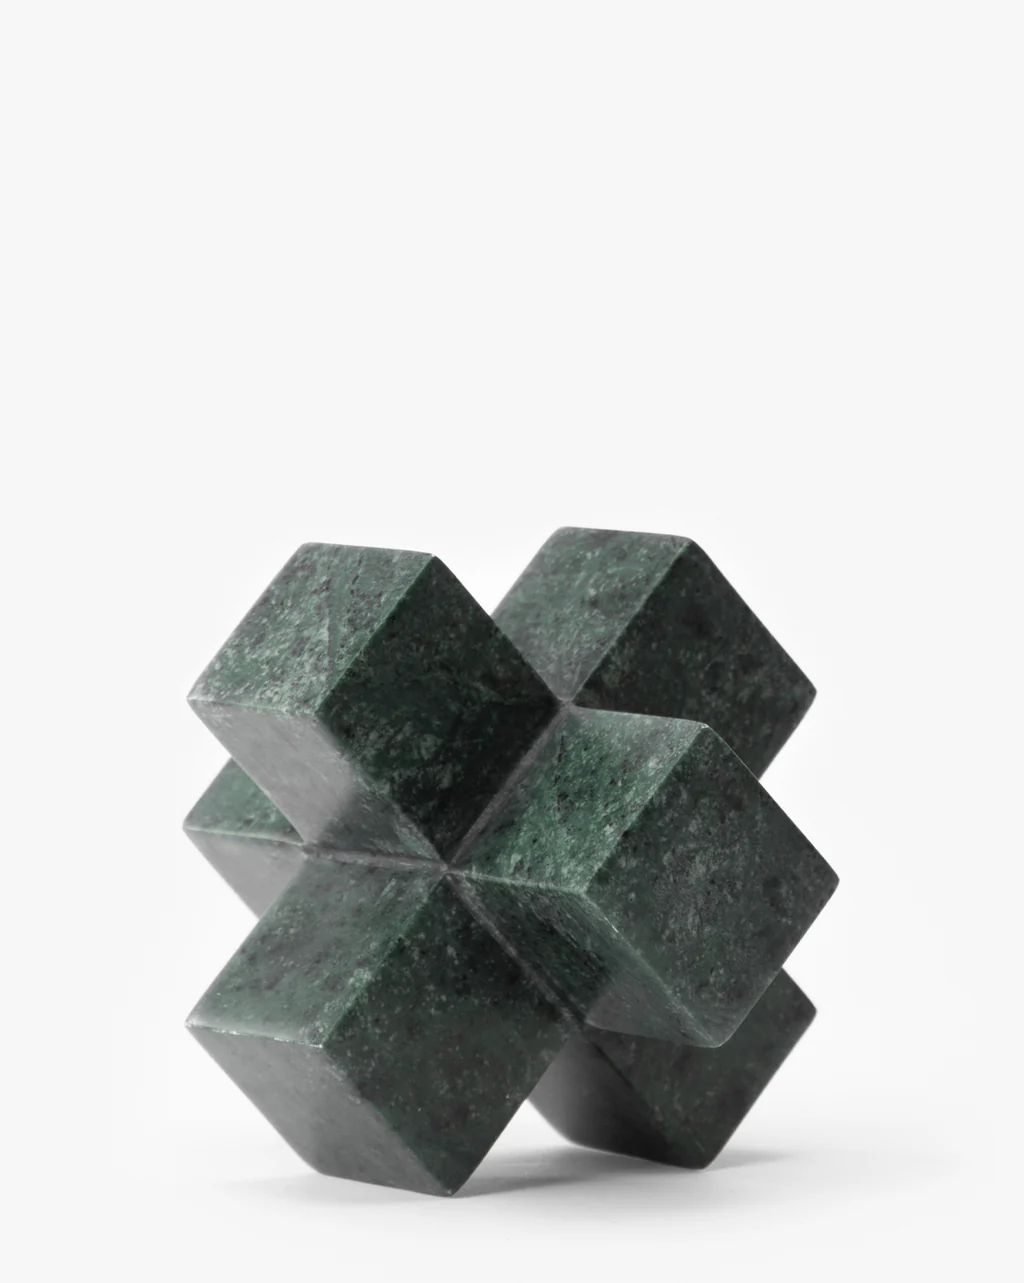 Diani Marble Cuboid Object | McGee & Co.